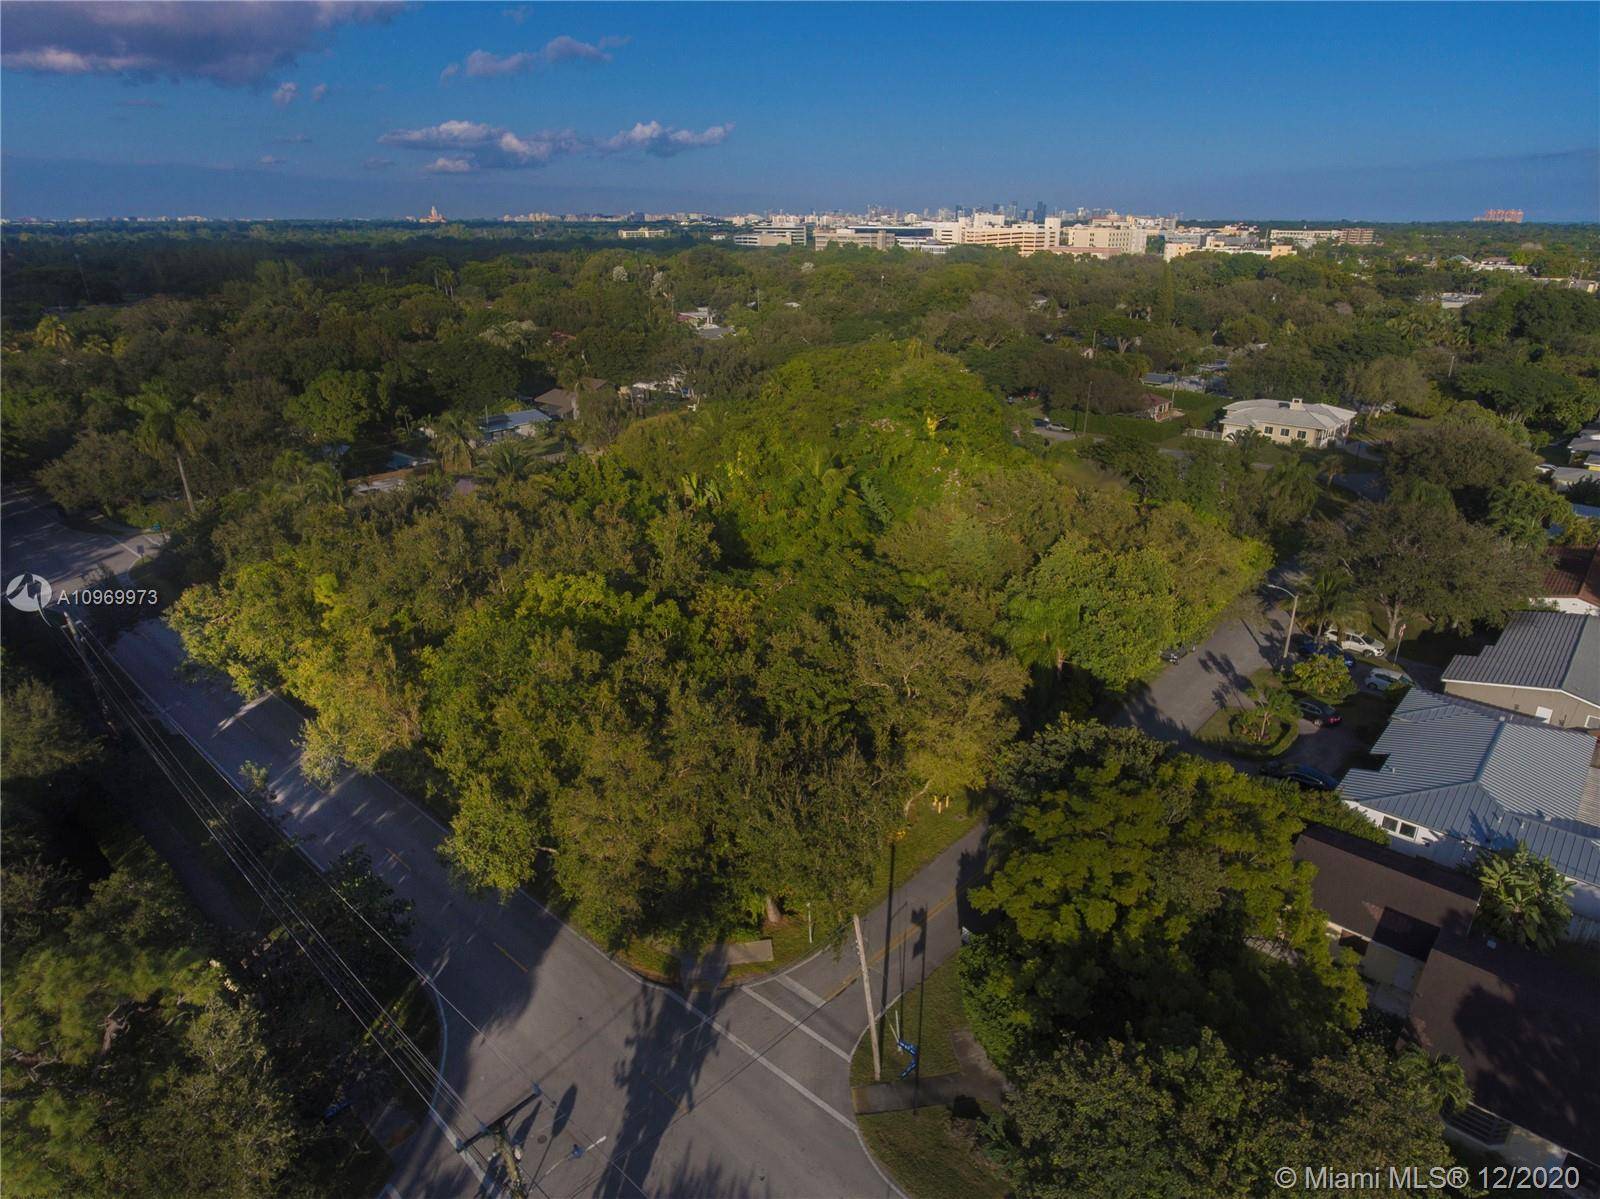 This almost 3 4 acre lot has the potential to be subdivided to build up to three individual residences.